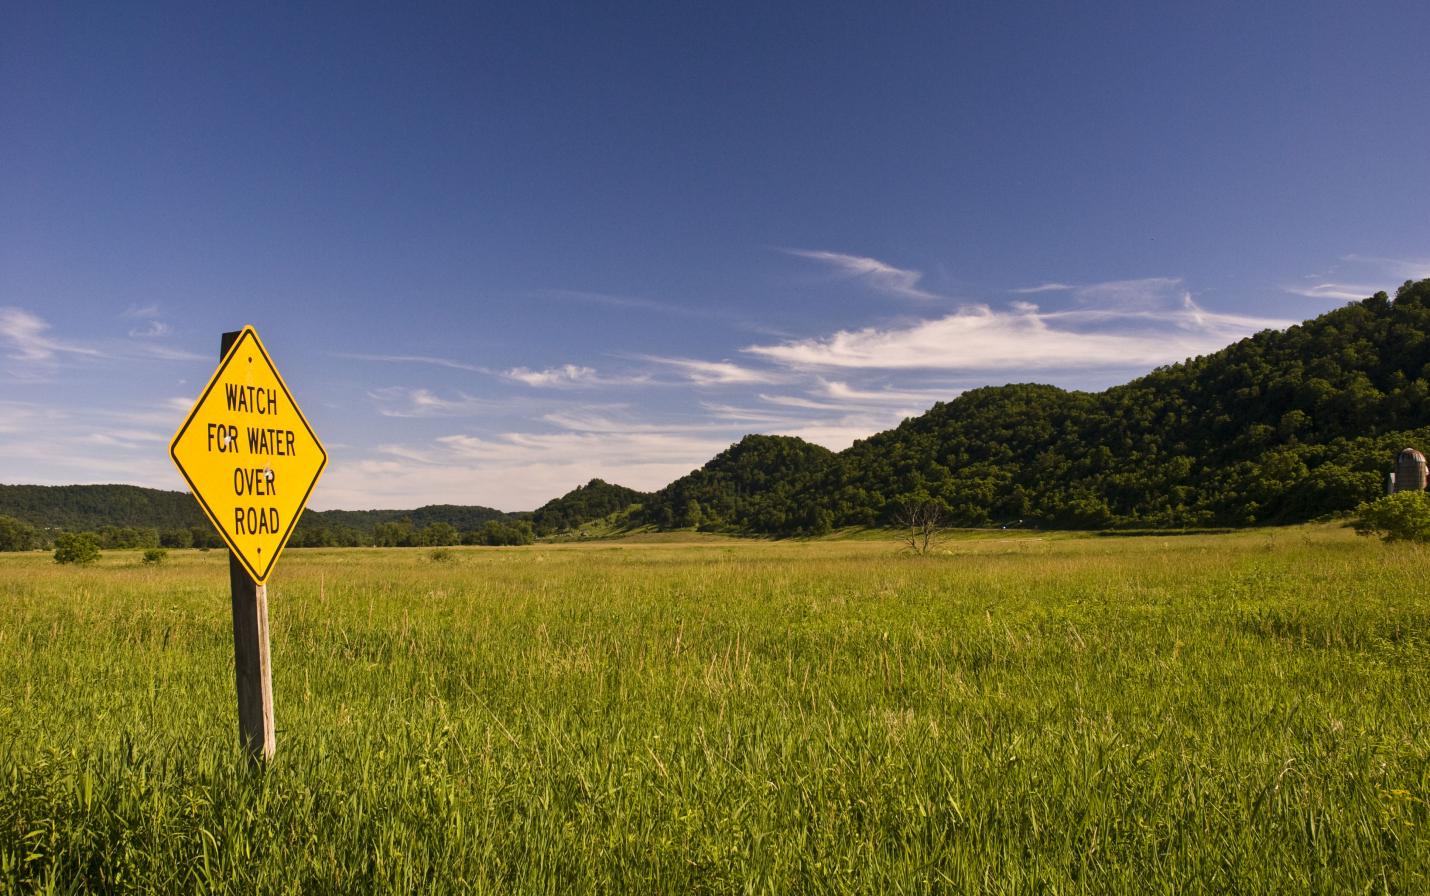 "Watch For Water Over Road" sign in a grassy field